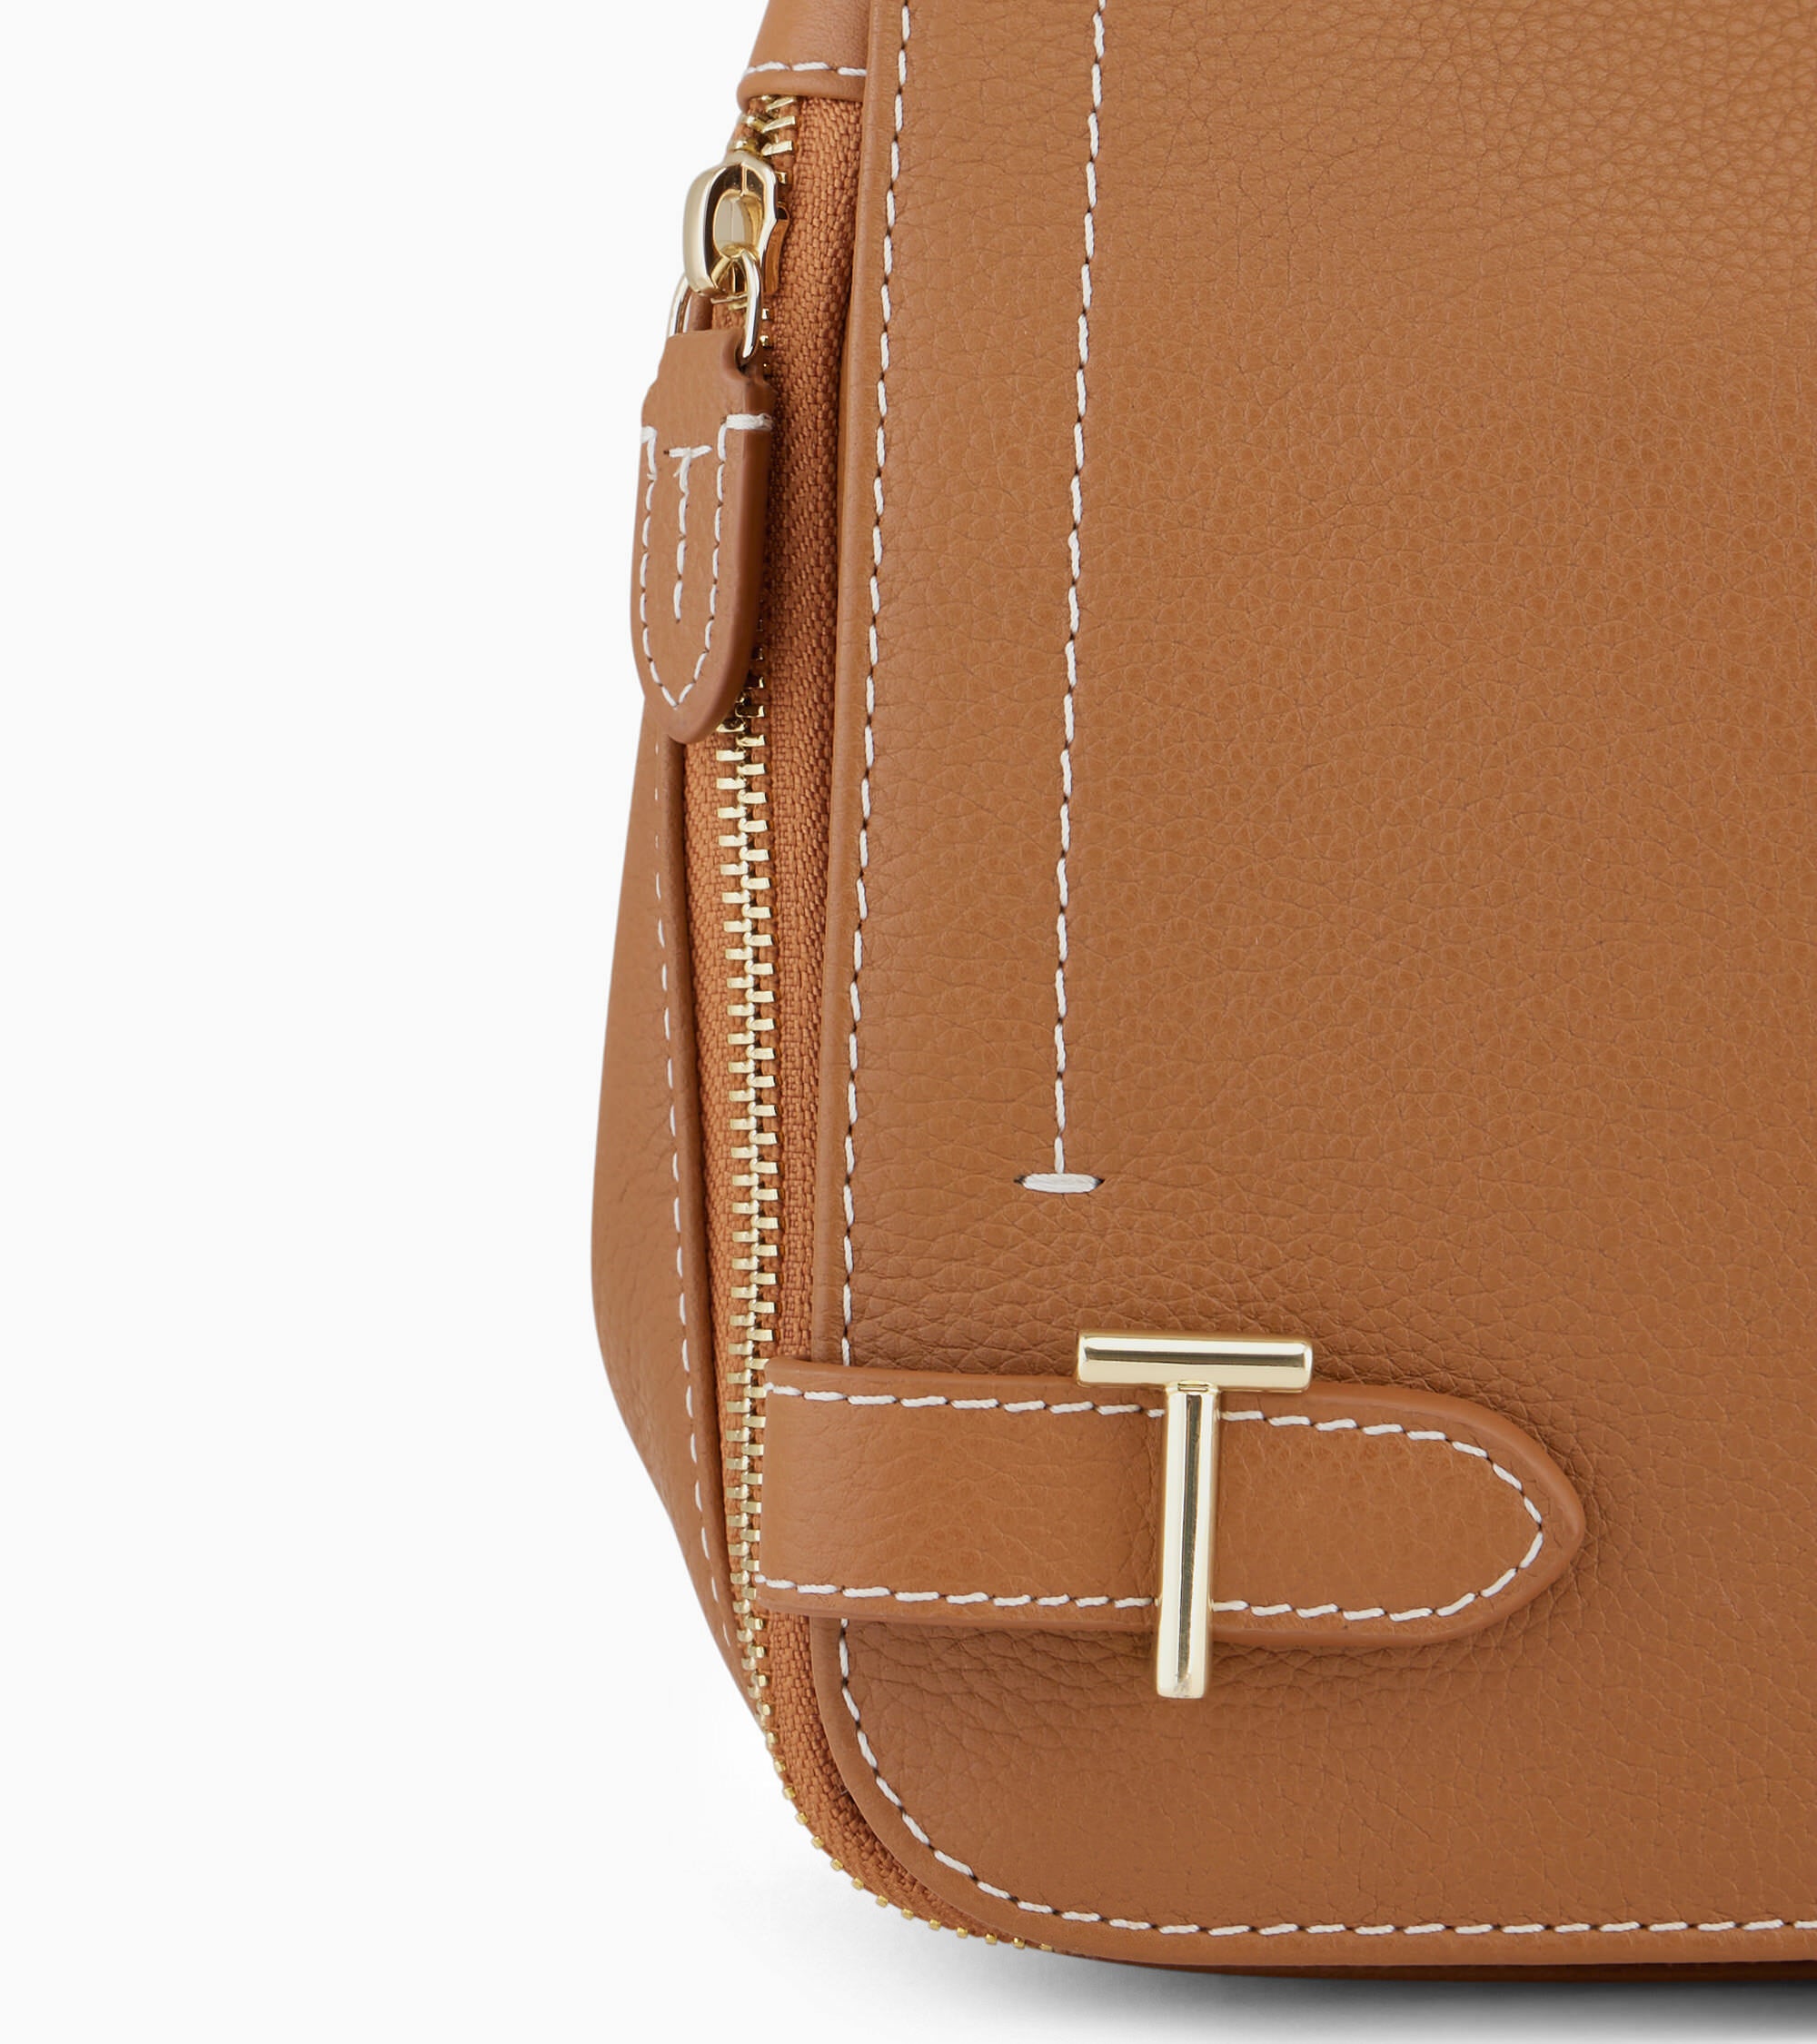 Simone medium-sized bag with crossbody strap in grained leather